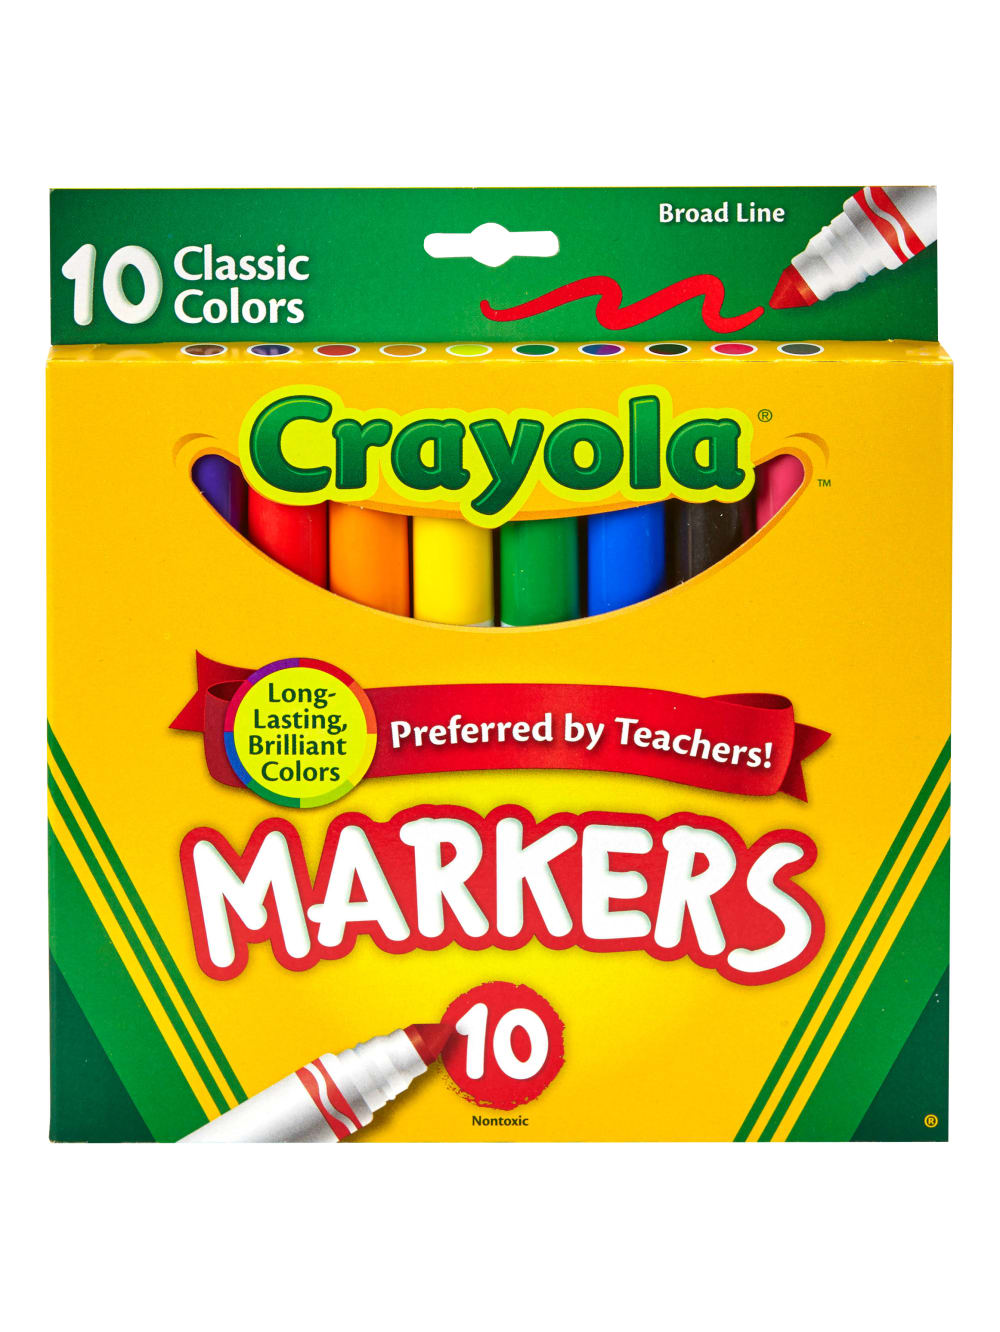 Crayola® Broad Line Markers, Assorted Classic Colors, Box Of 10
				
		        		












	
			
				
				 
					Item # 
					
						
							
							
								764180